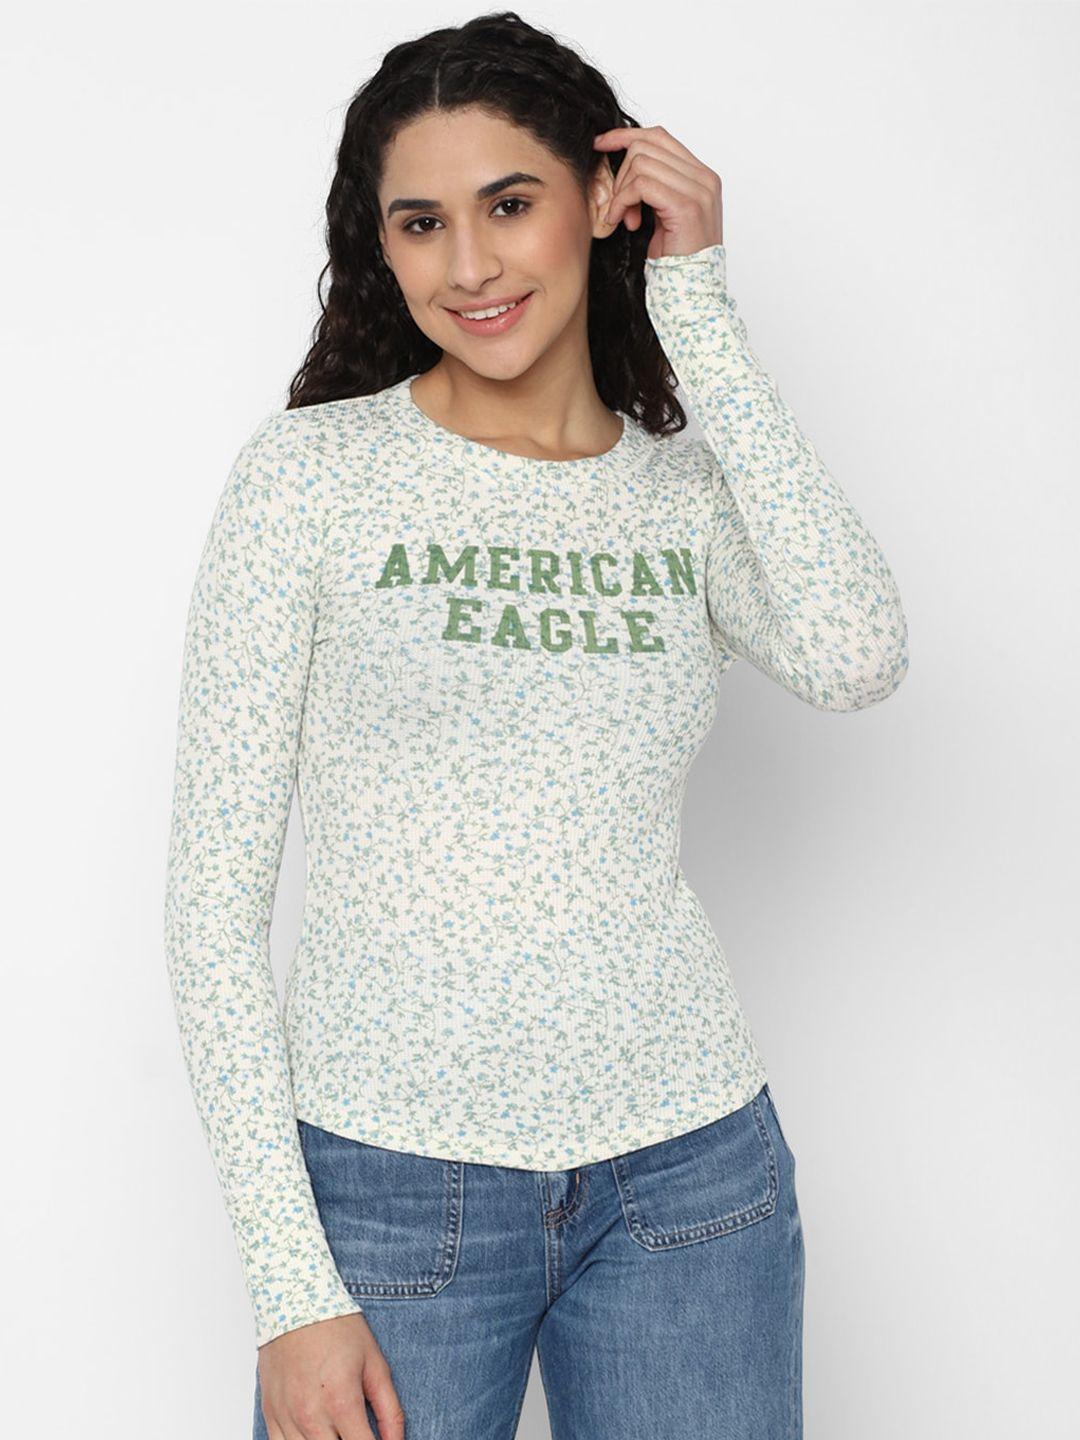 american eagle outfitters women off white & green floral printed t-shirt